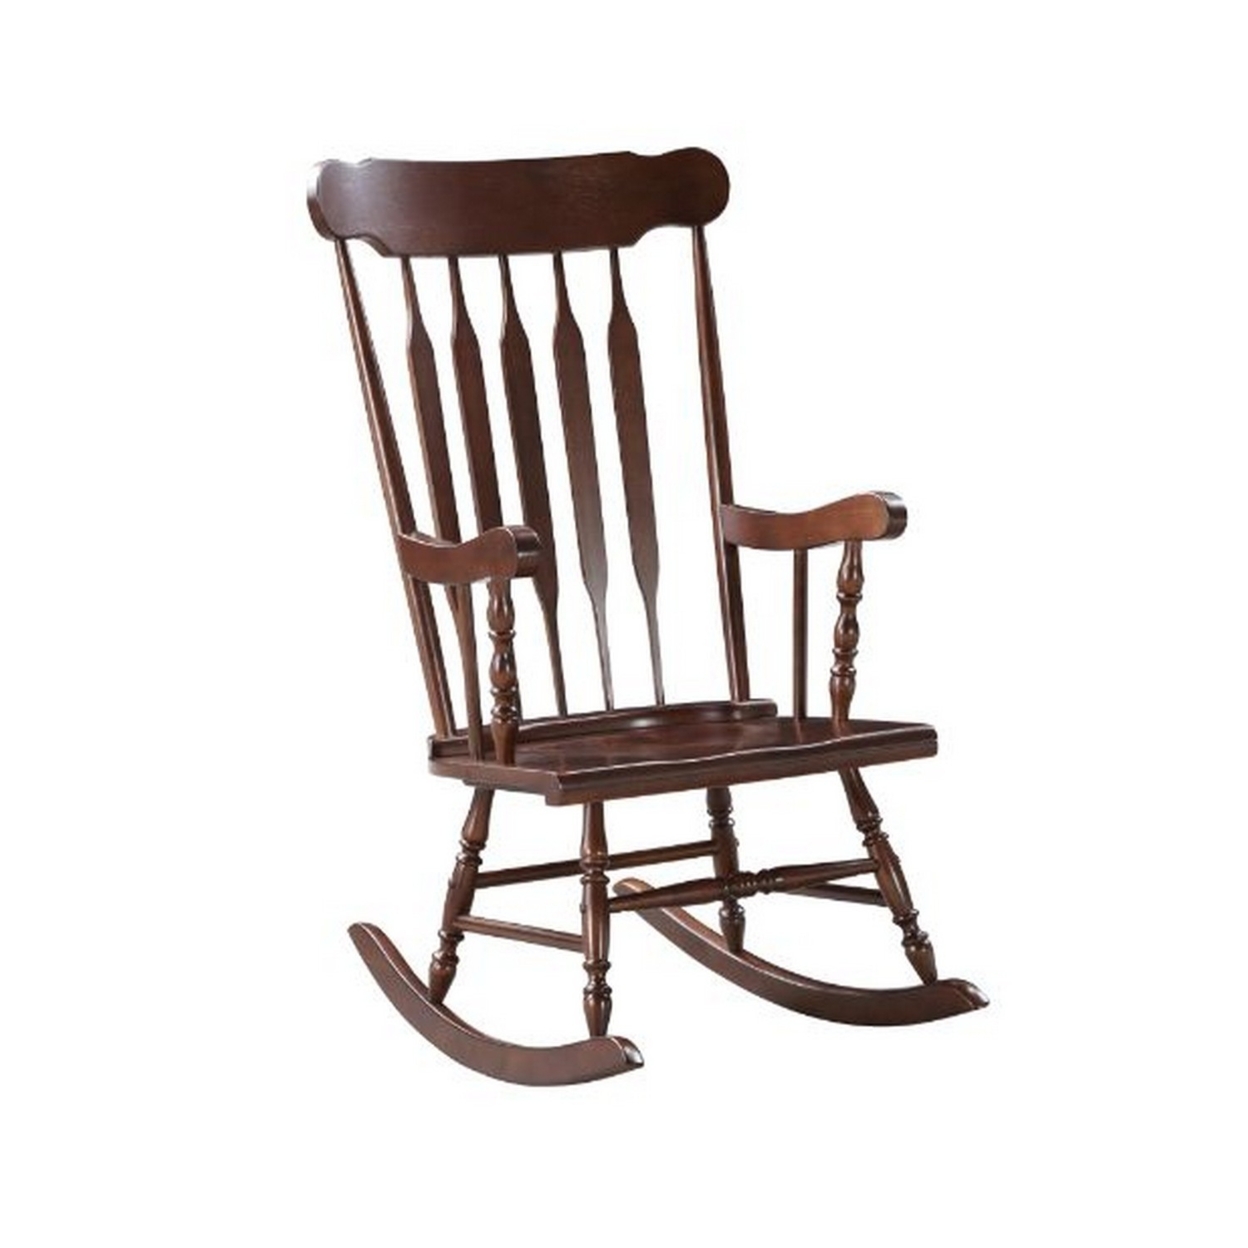 Rocking Chair With Wooden Frame And Slatted Back, Dark Brown- Saltoro Sherpi